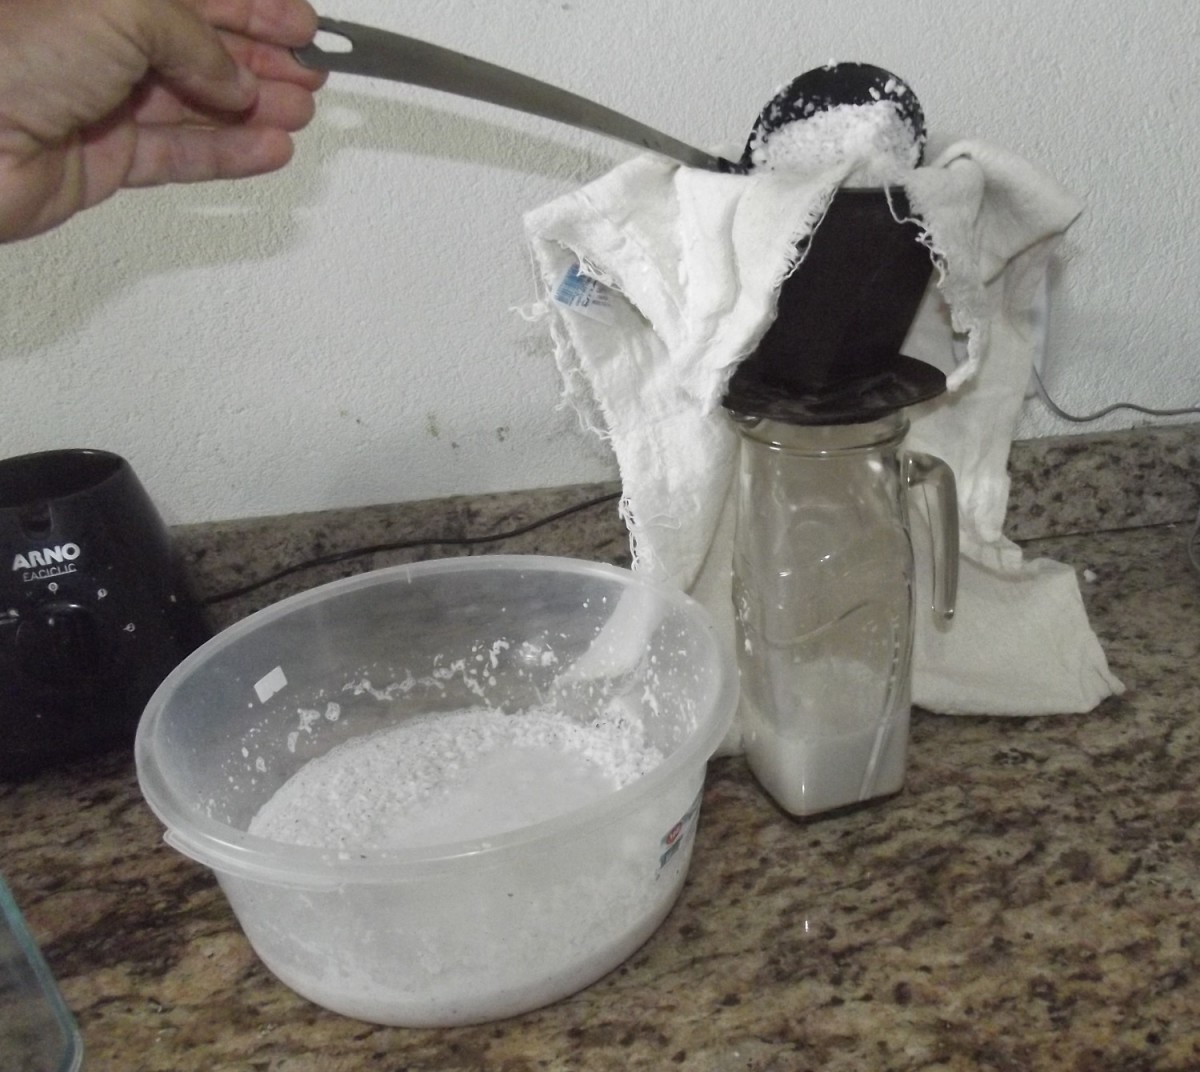 Filter the coconut through a cheesecloth and collect the coconut milk.